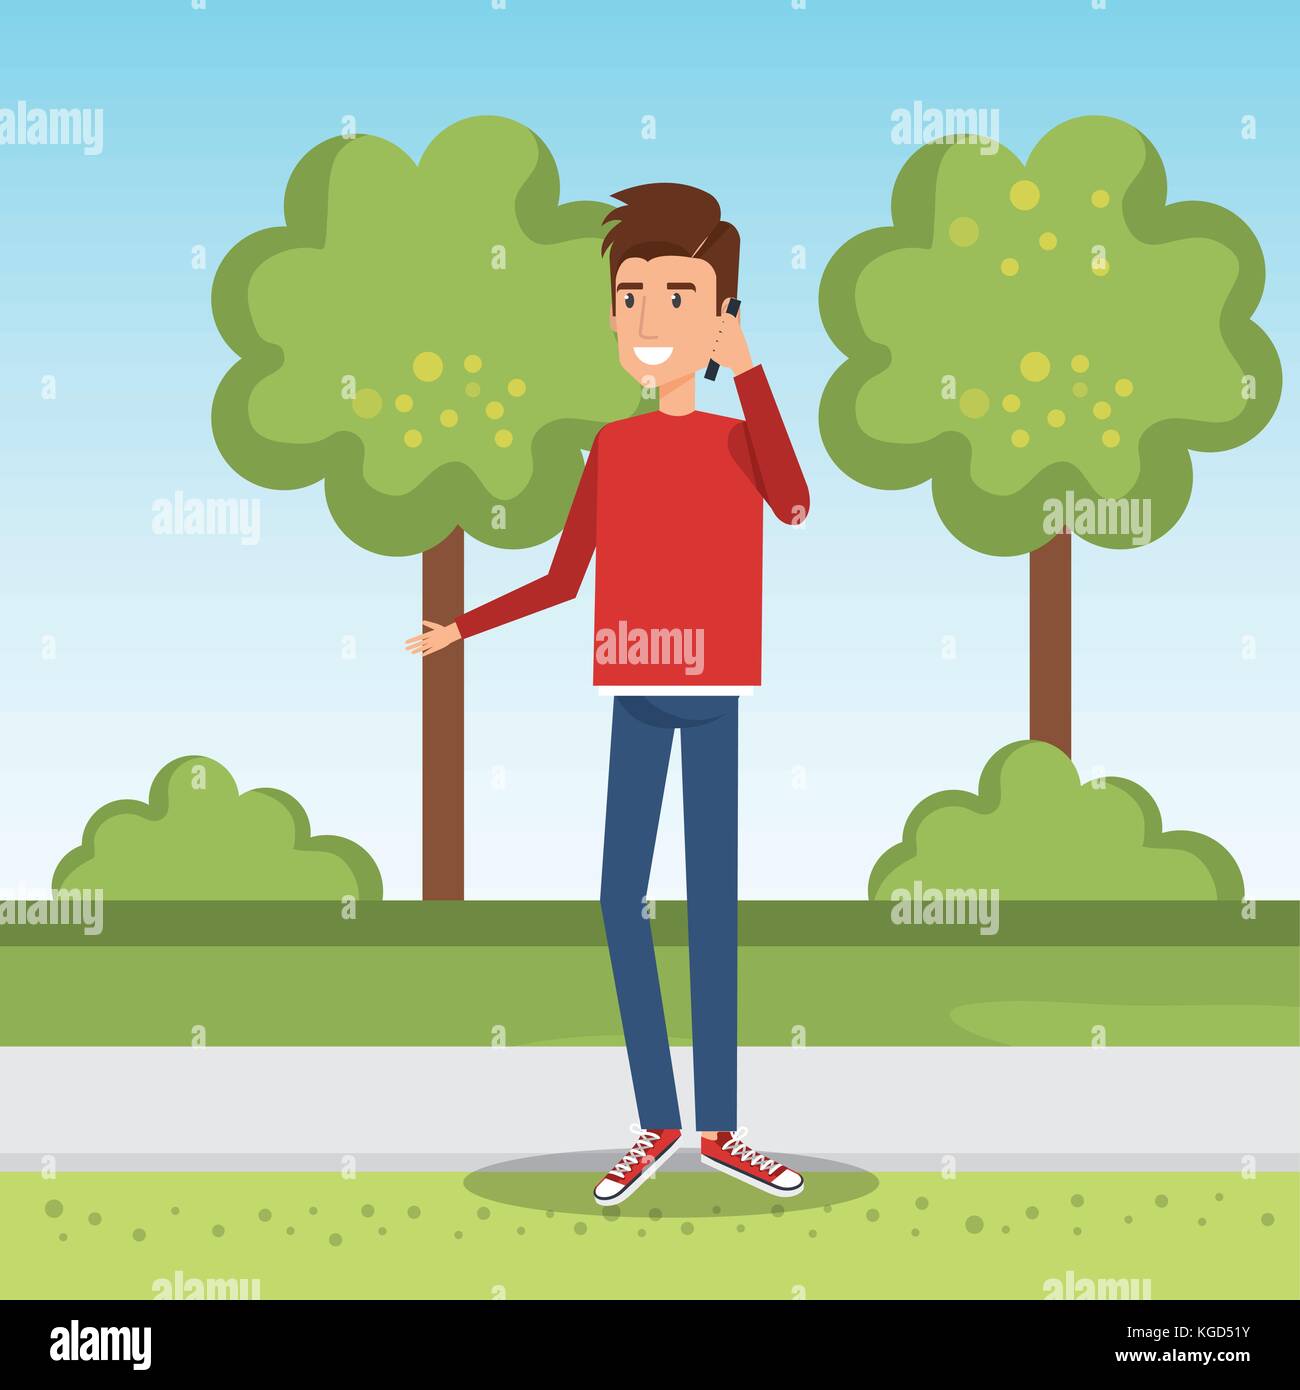 young man model avatar character Stock Vector